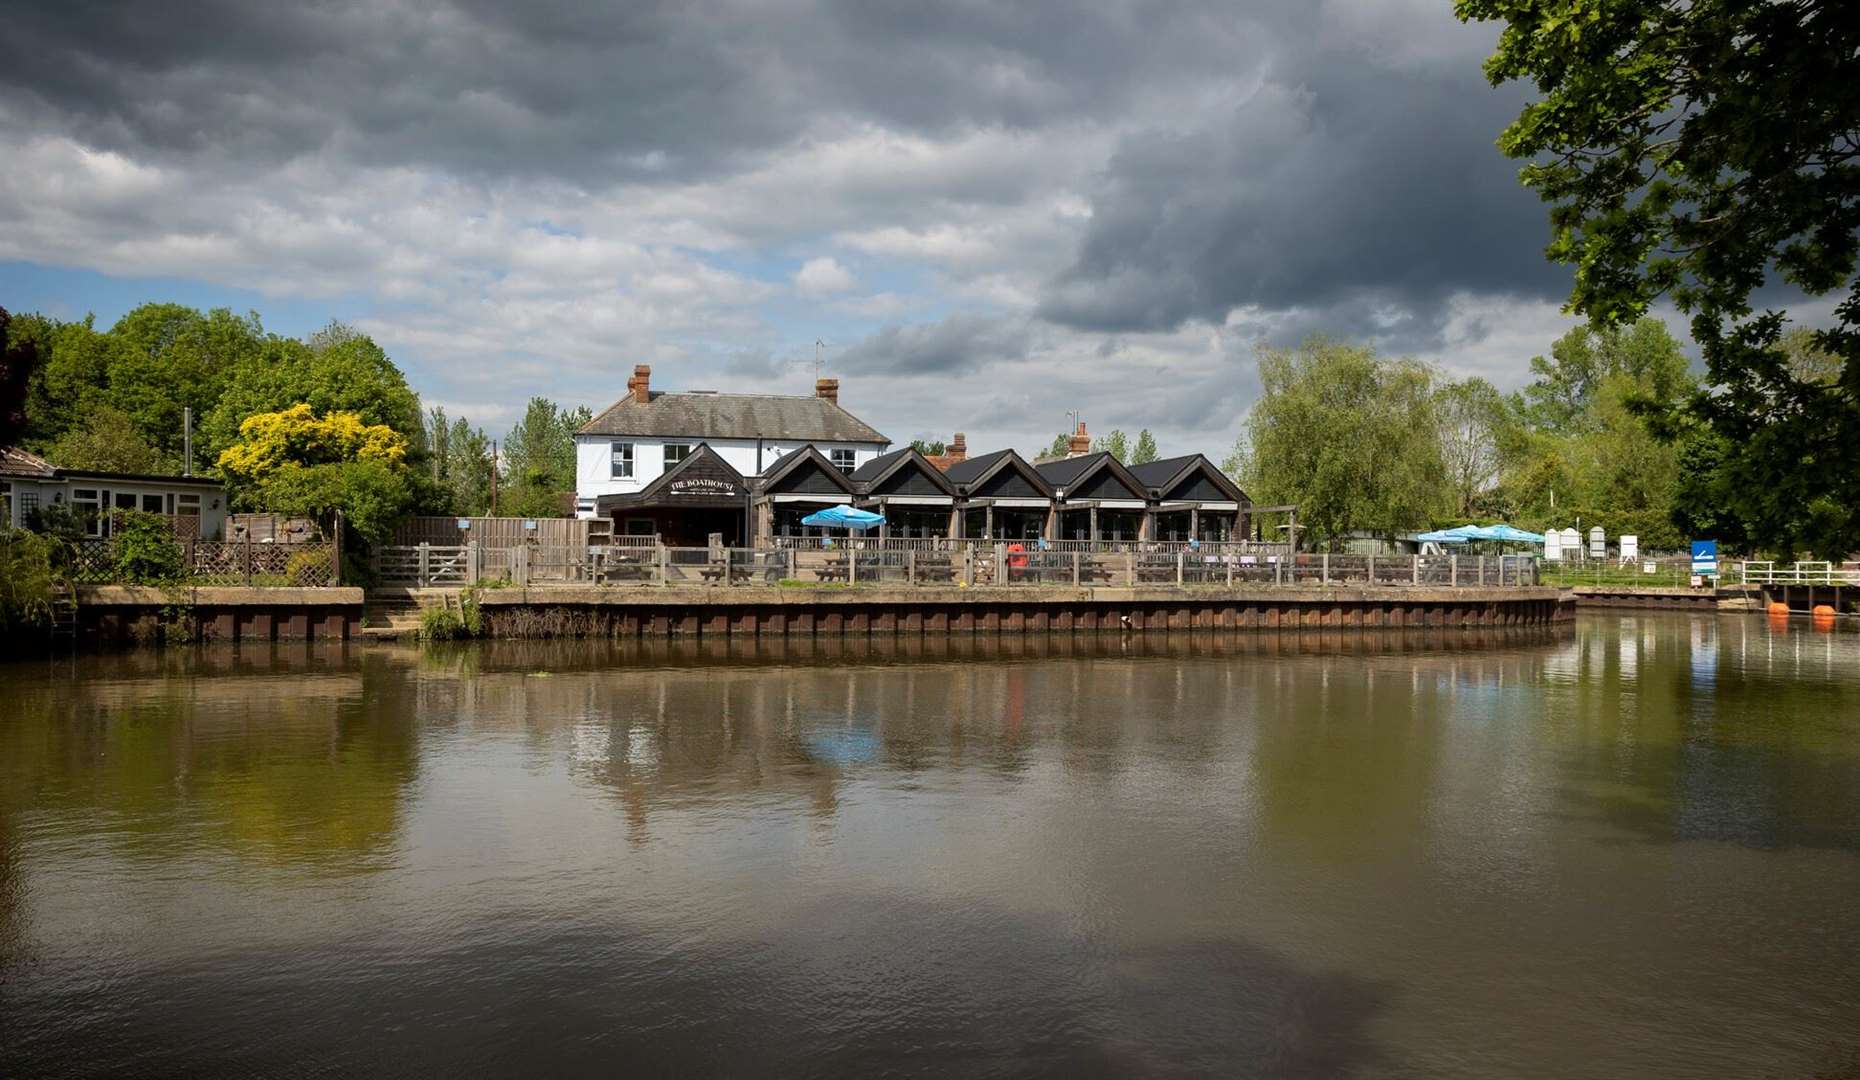 The new owners of The Boathouse have got lots of plans for the summer